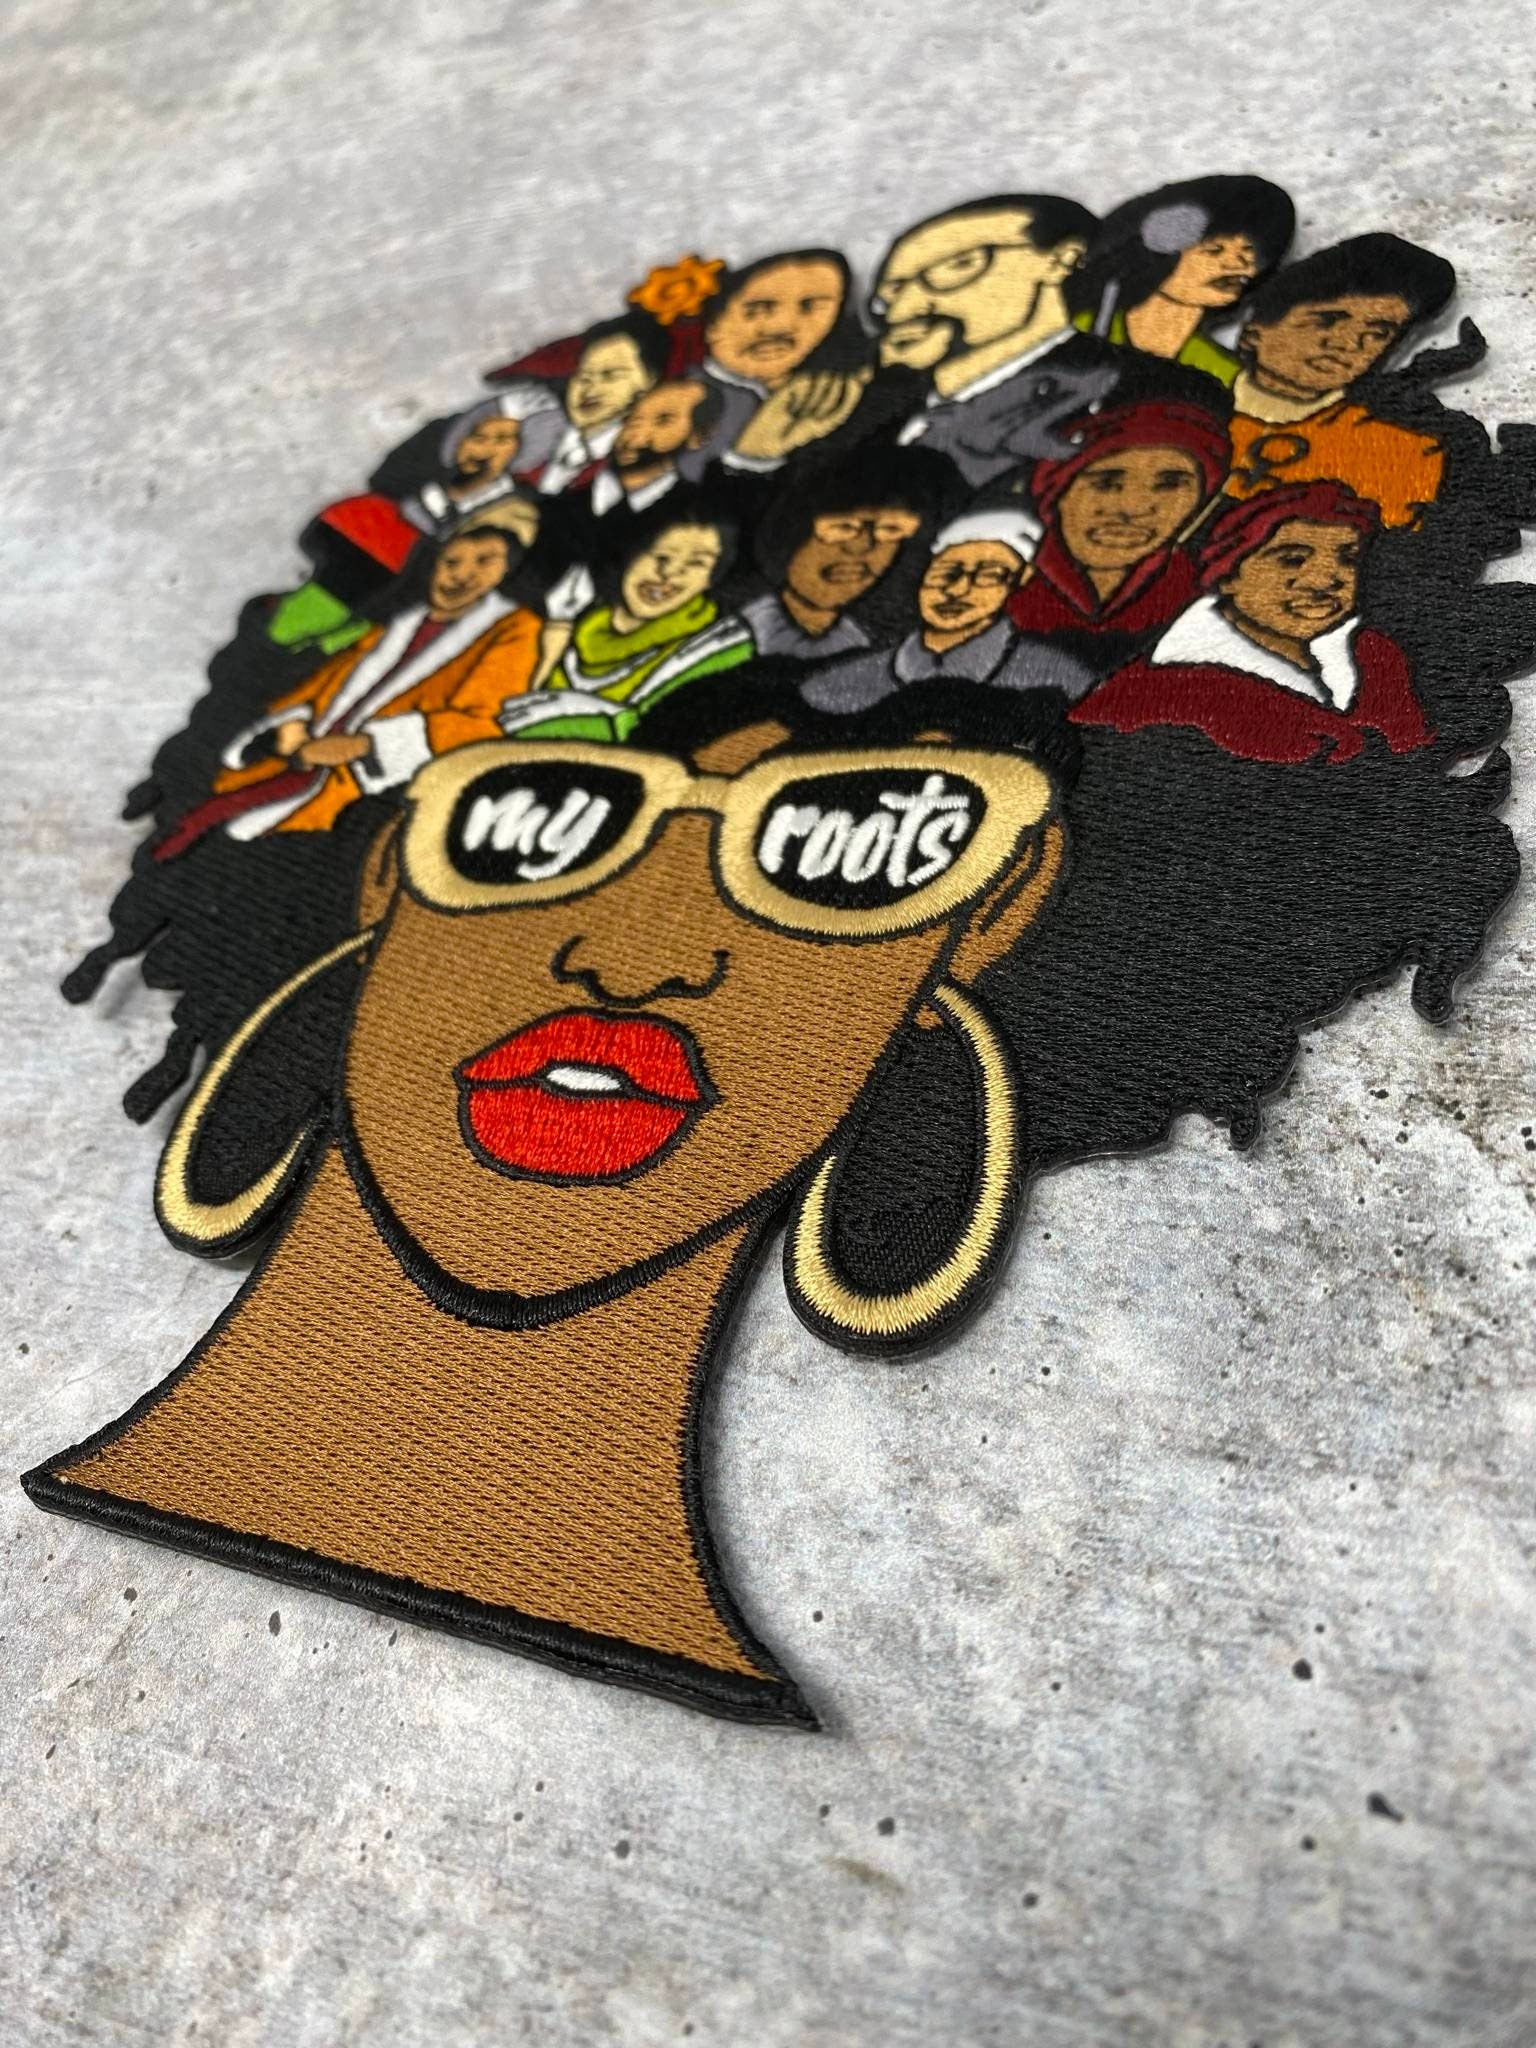 Exclusive, "Lovin My Roots", 100% Embroidered, Embroidery Patch, 2 Sizes Available, Iron-on Applique, Back Patch, Black History Month Gift